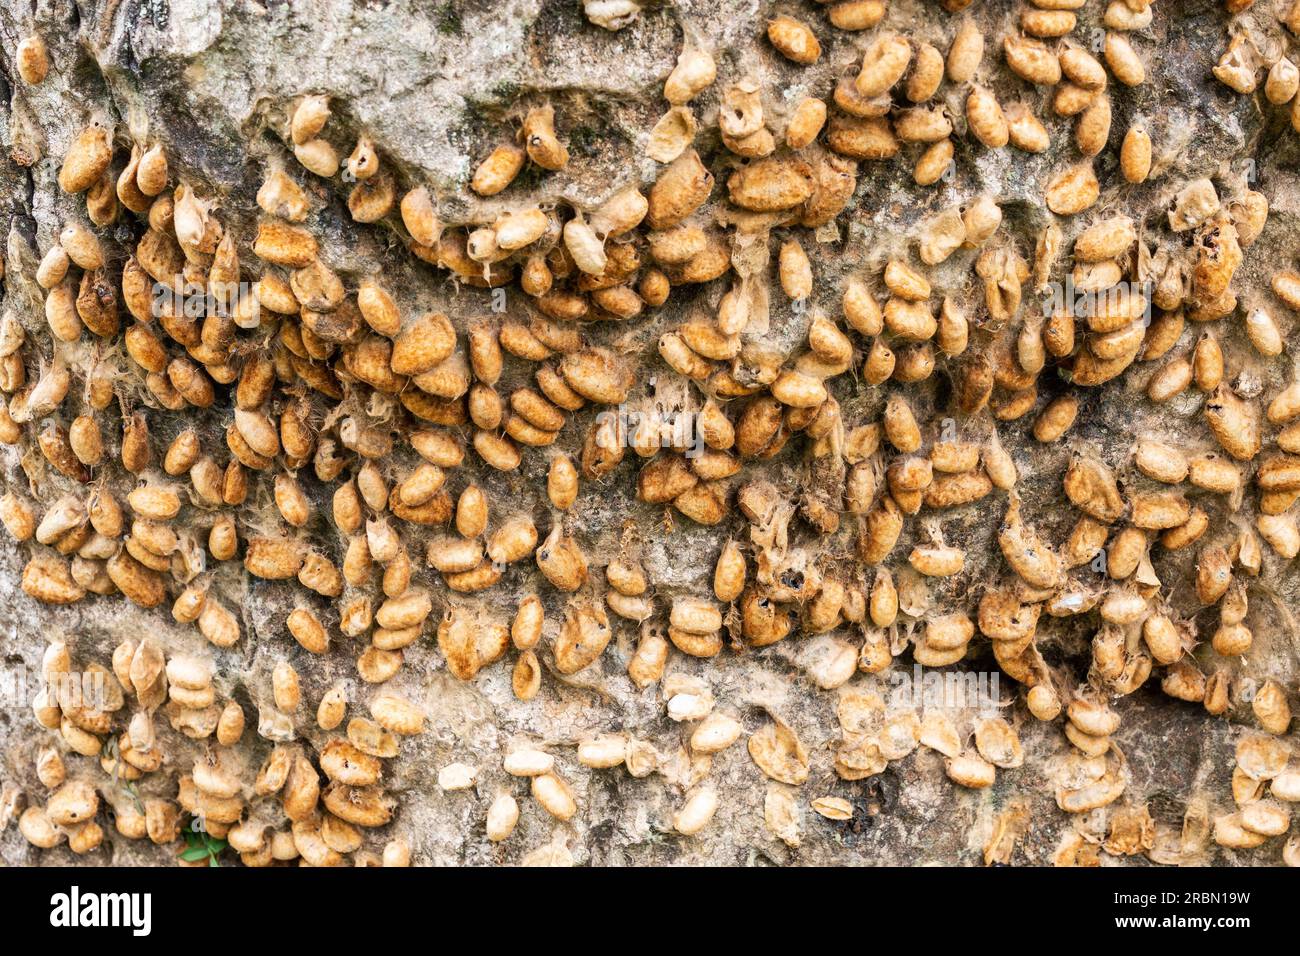 Empty cocoons of a species of African moth covering a tree trunk. Entebbe Botanical Garden, Uganda. Stock Photo